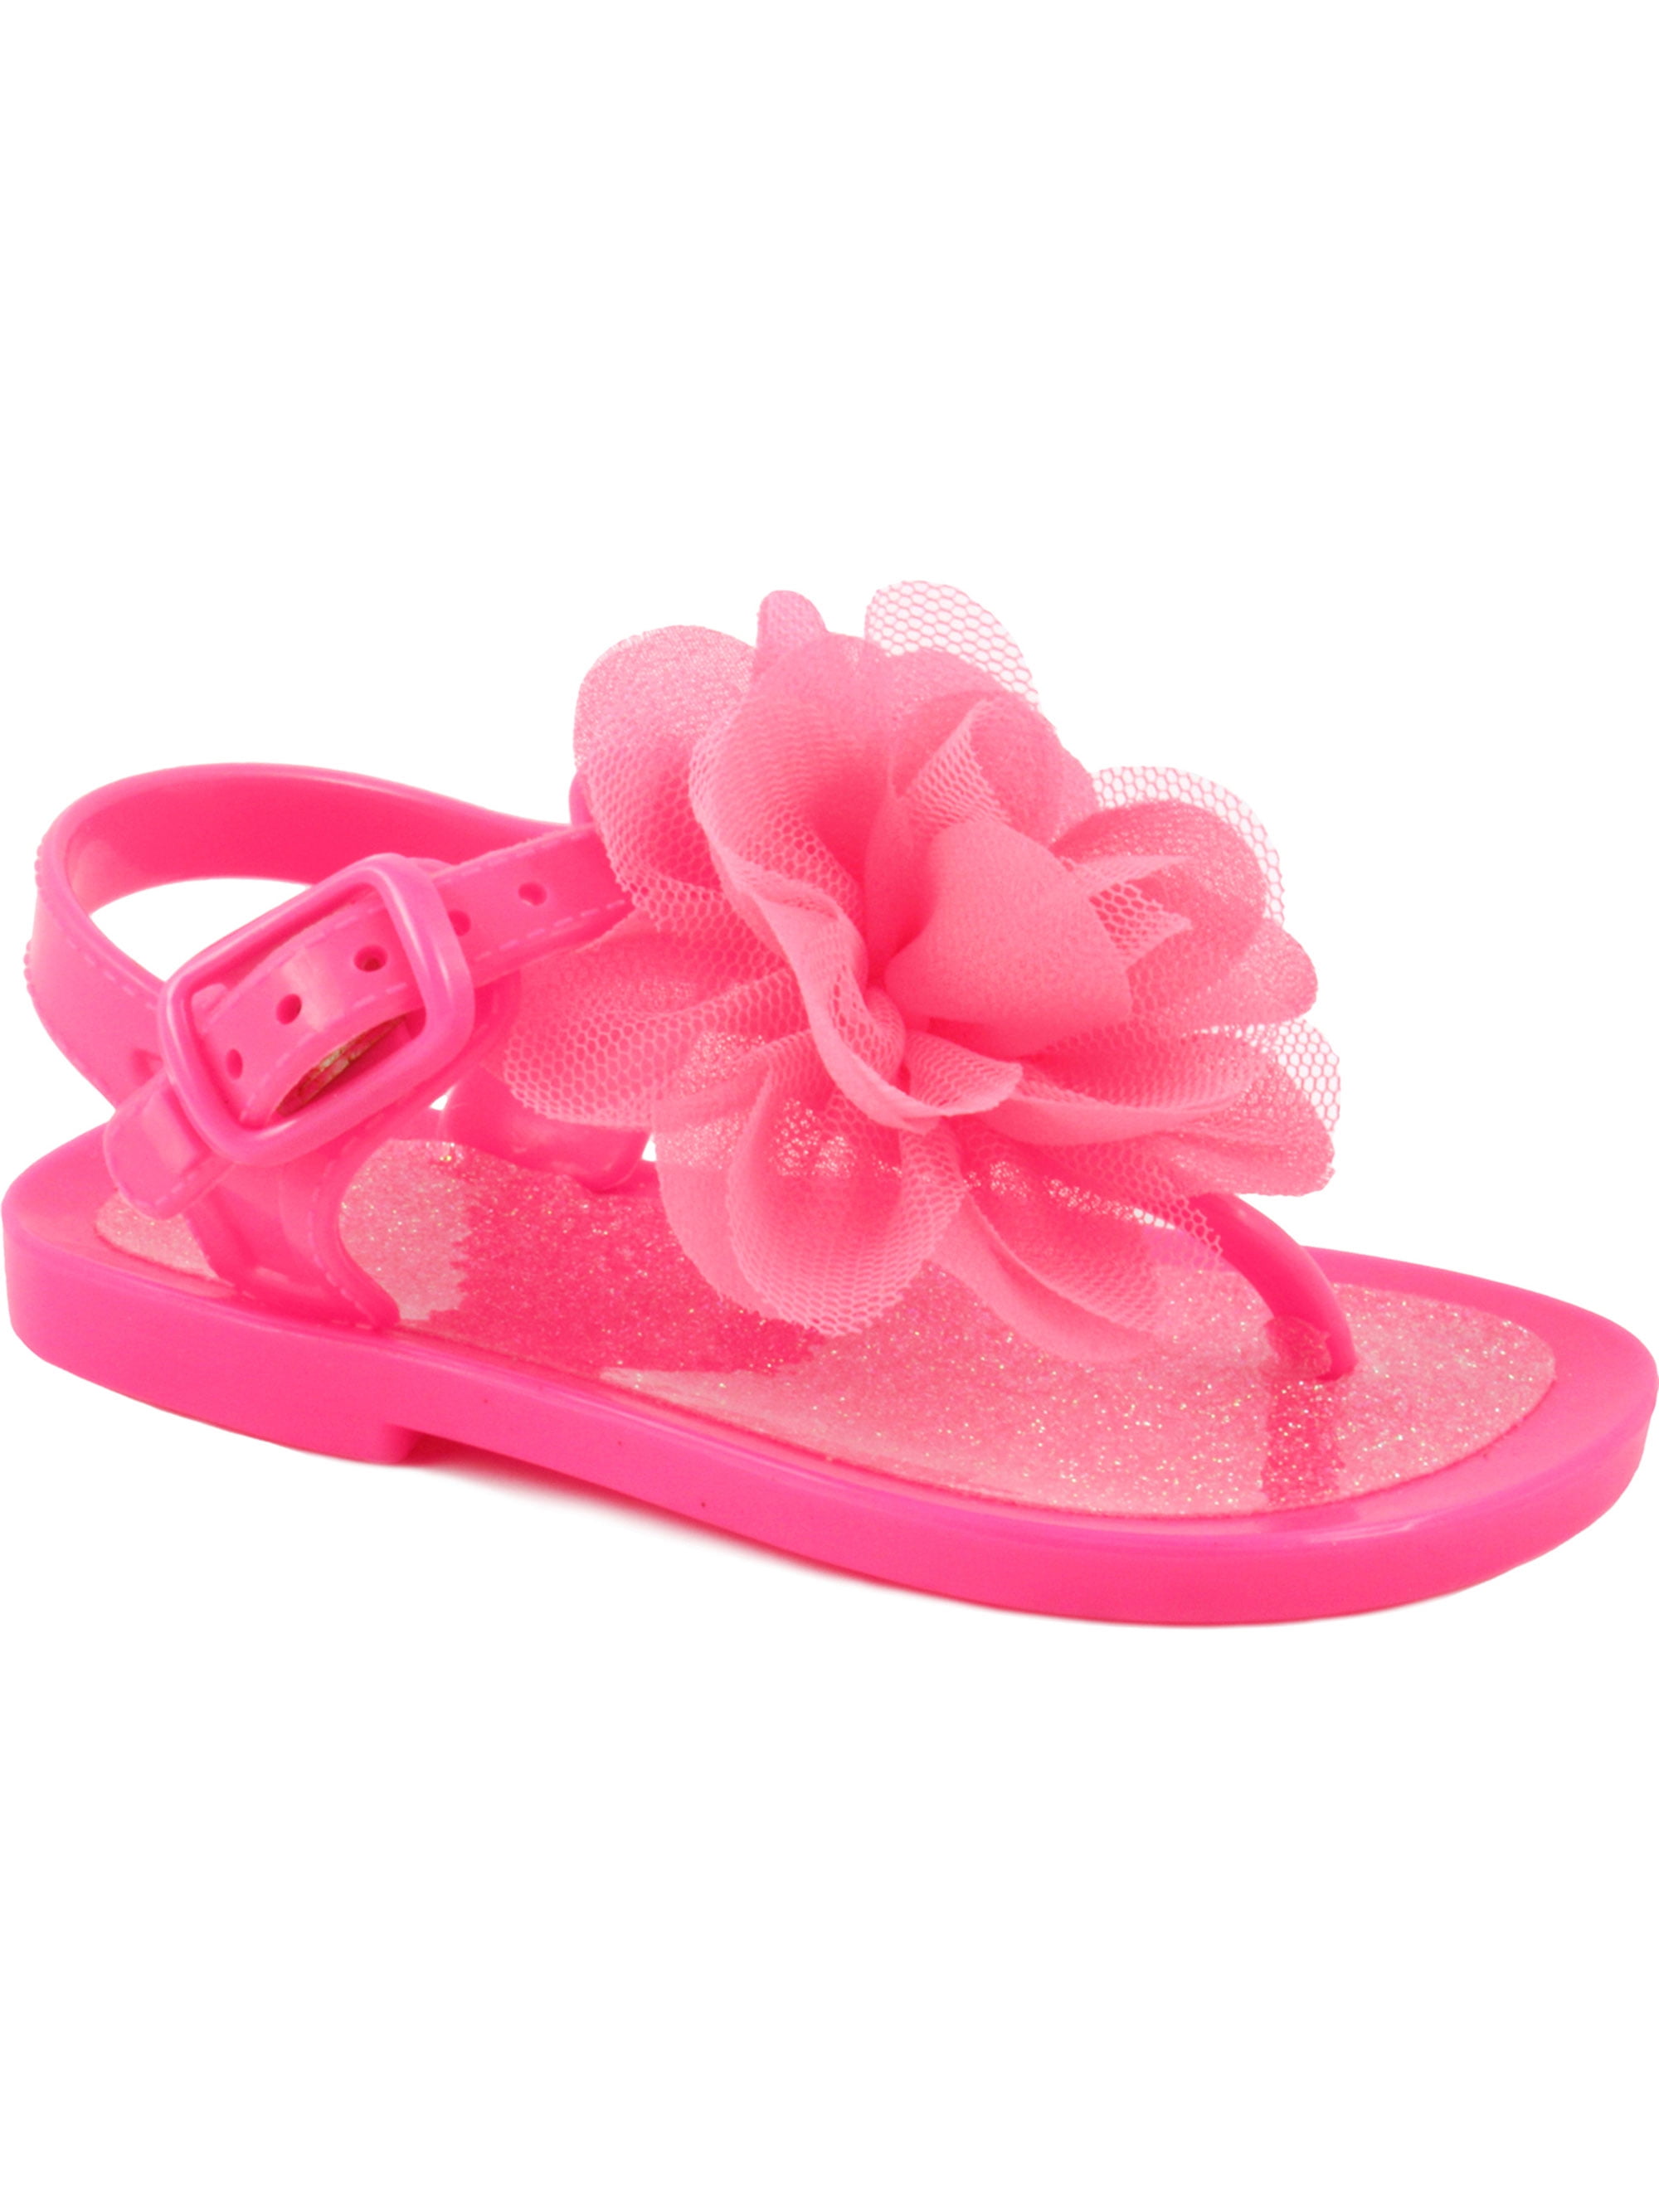 baby pink shoes for girls